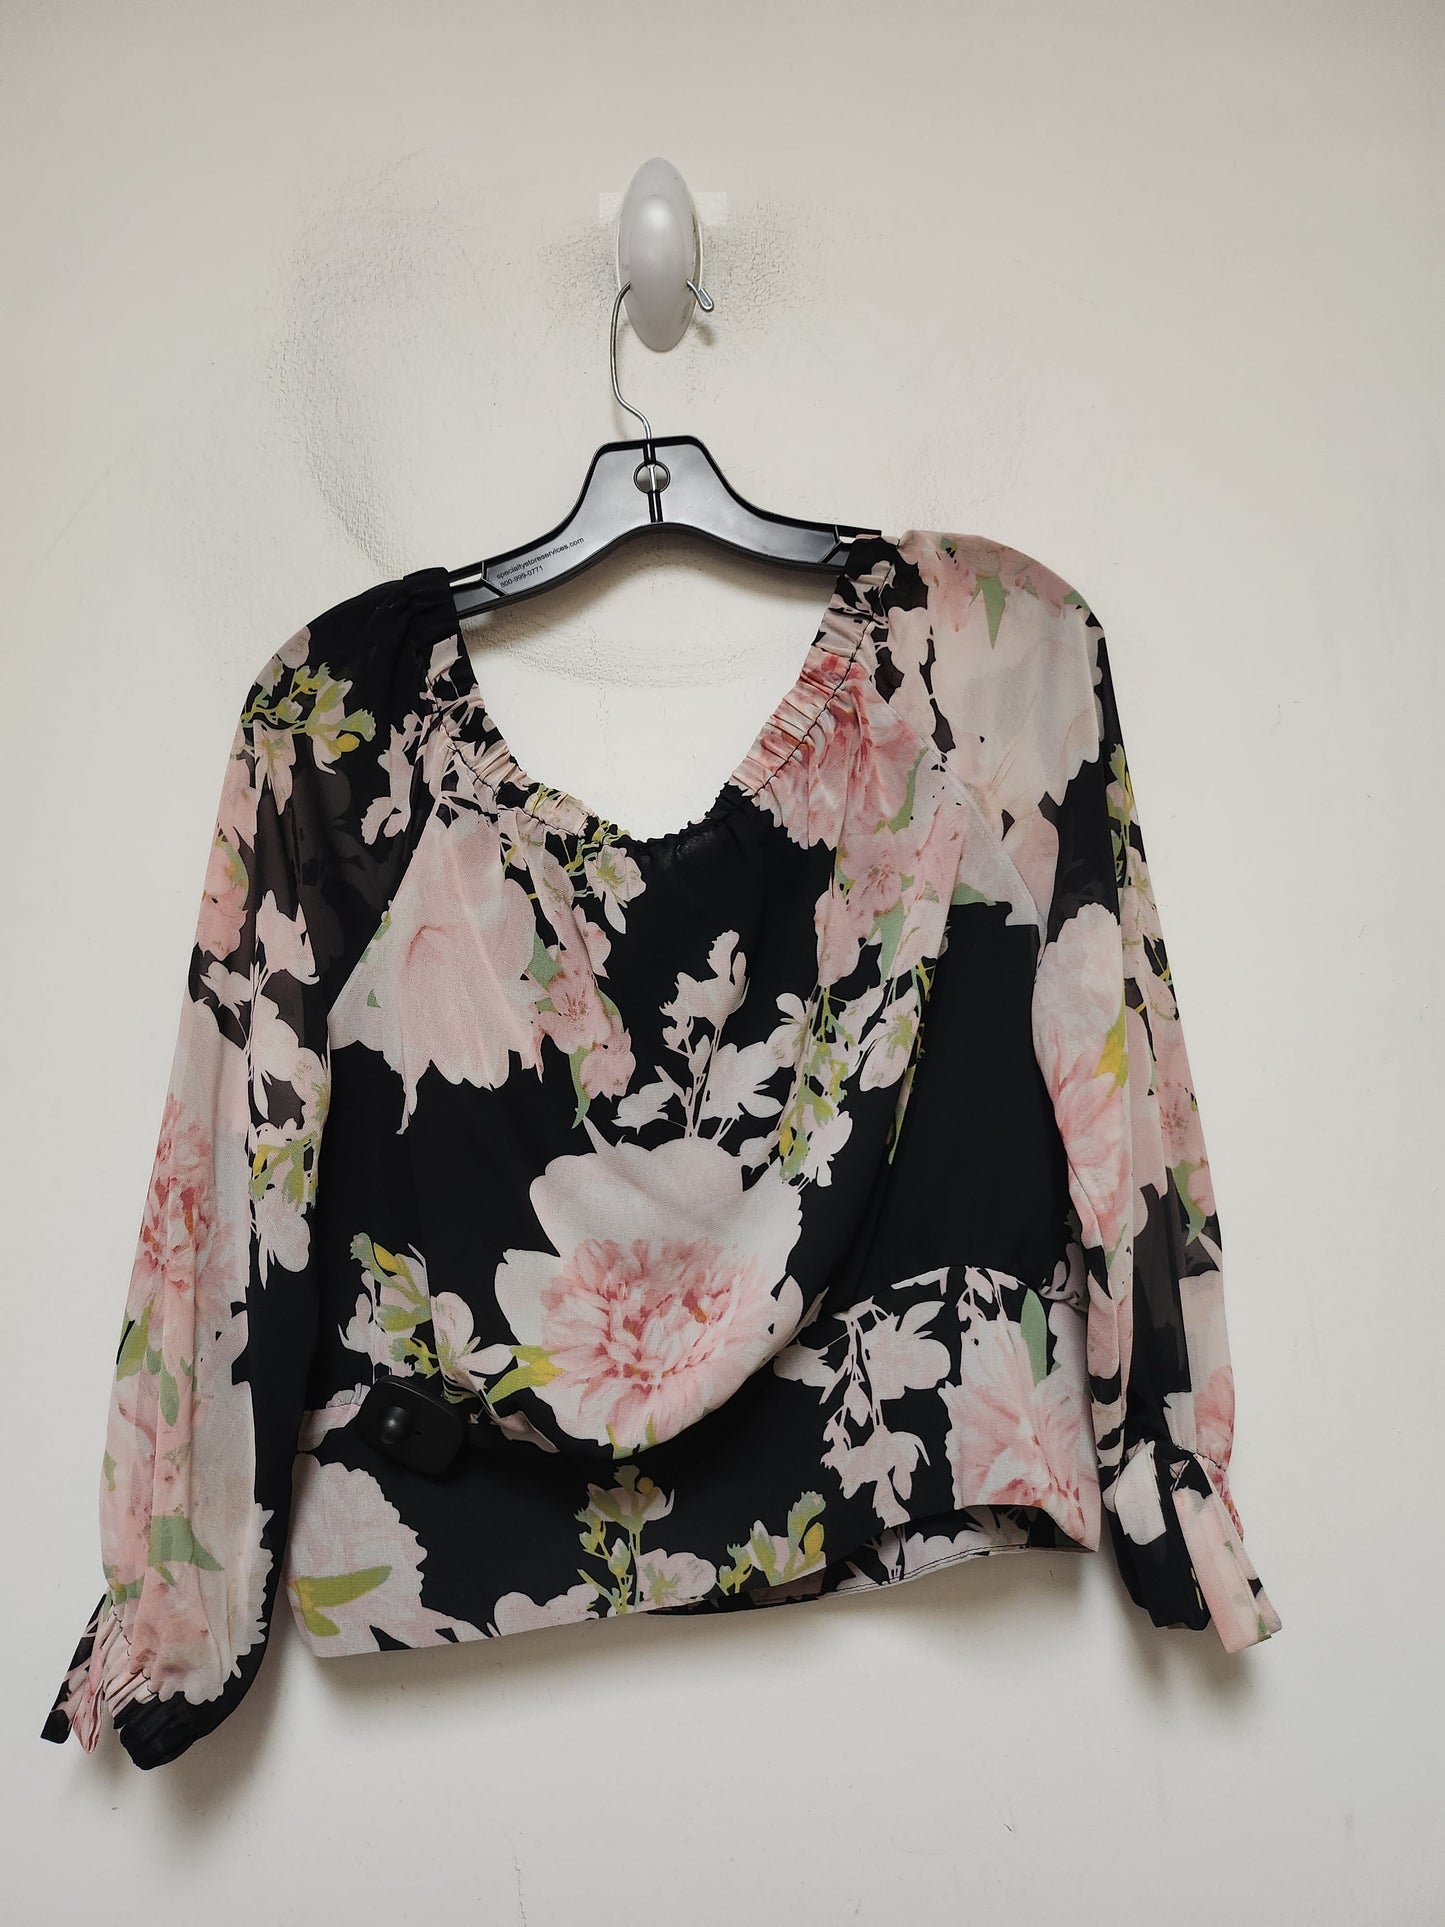 Floral Print Top Long Sleeve New York And Co, Size M